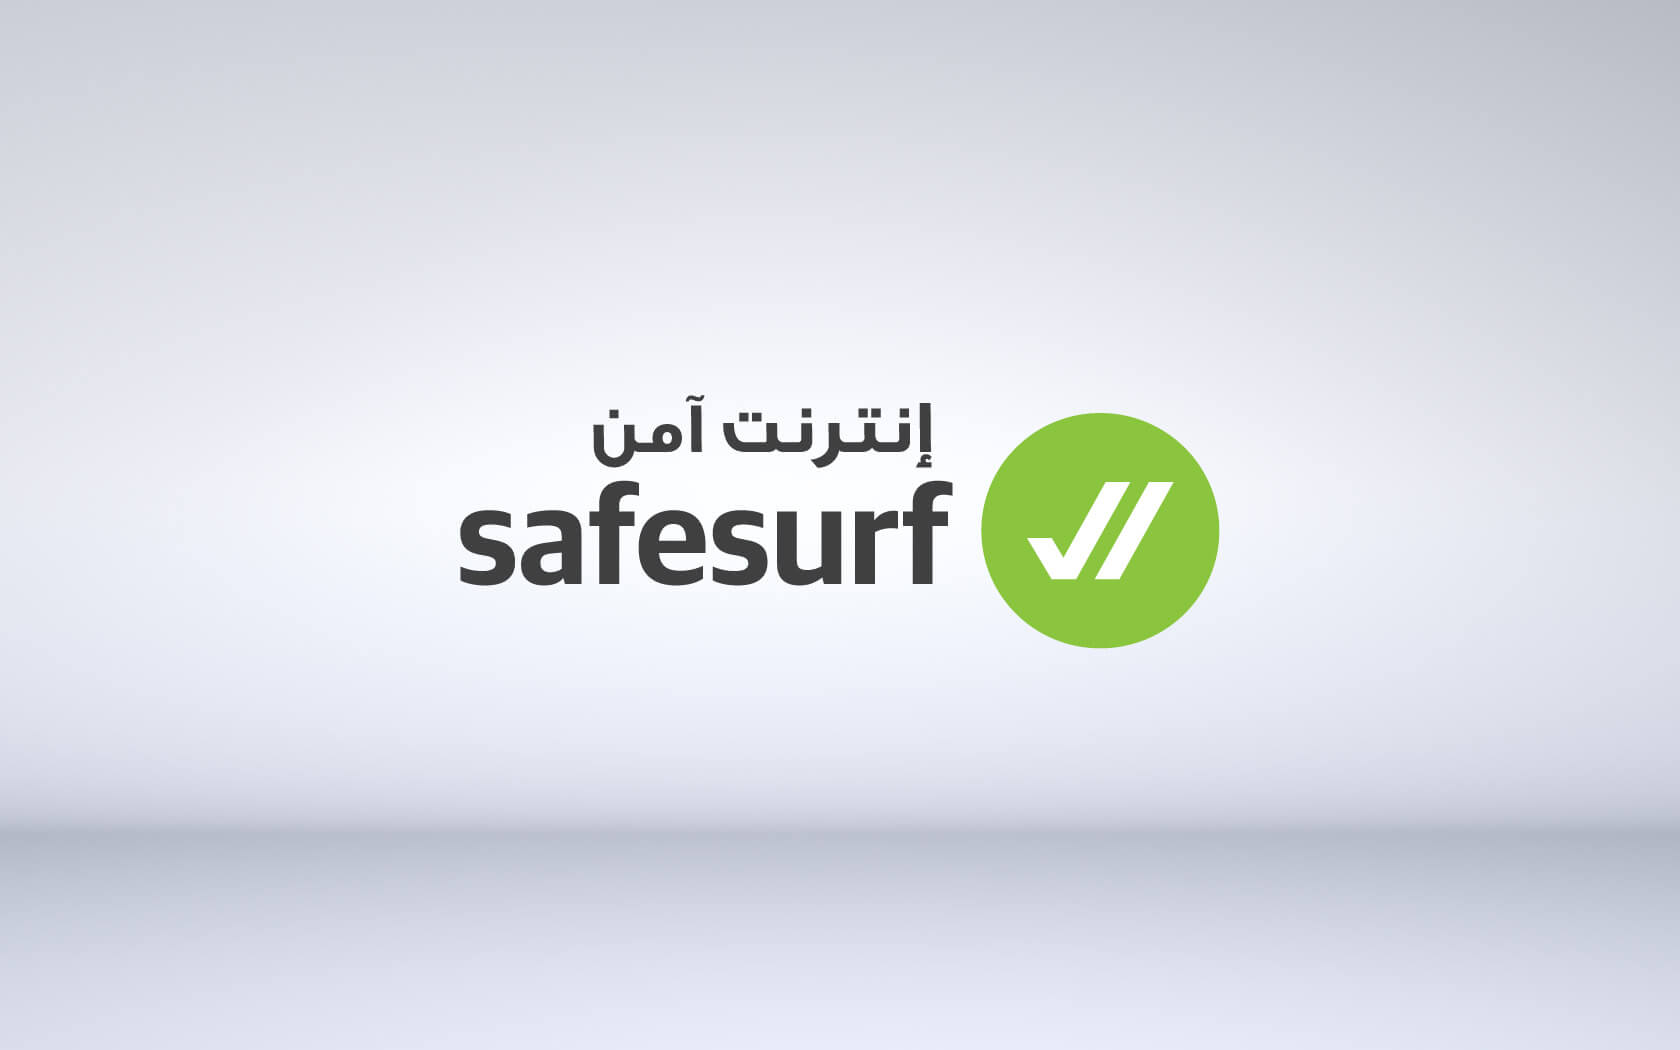 Safe Surf Logo - Safe Internet campaign and identity fully integrated